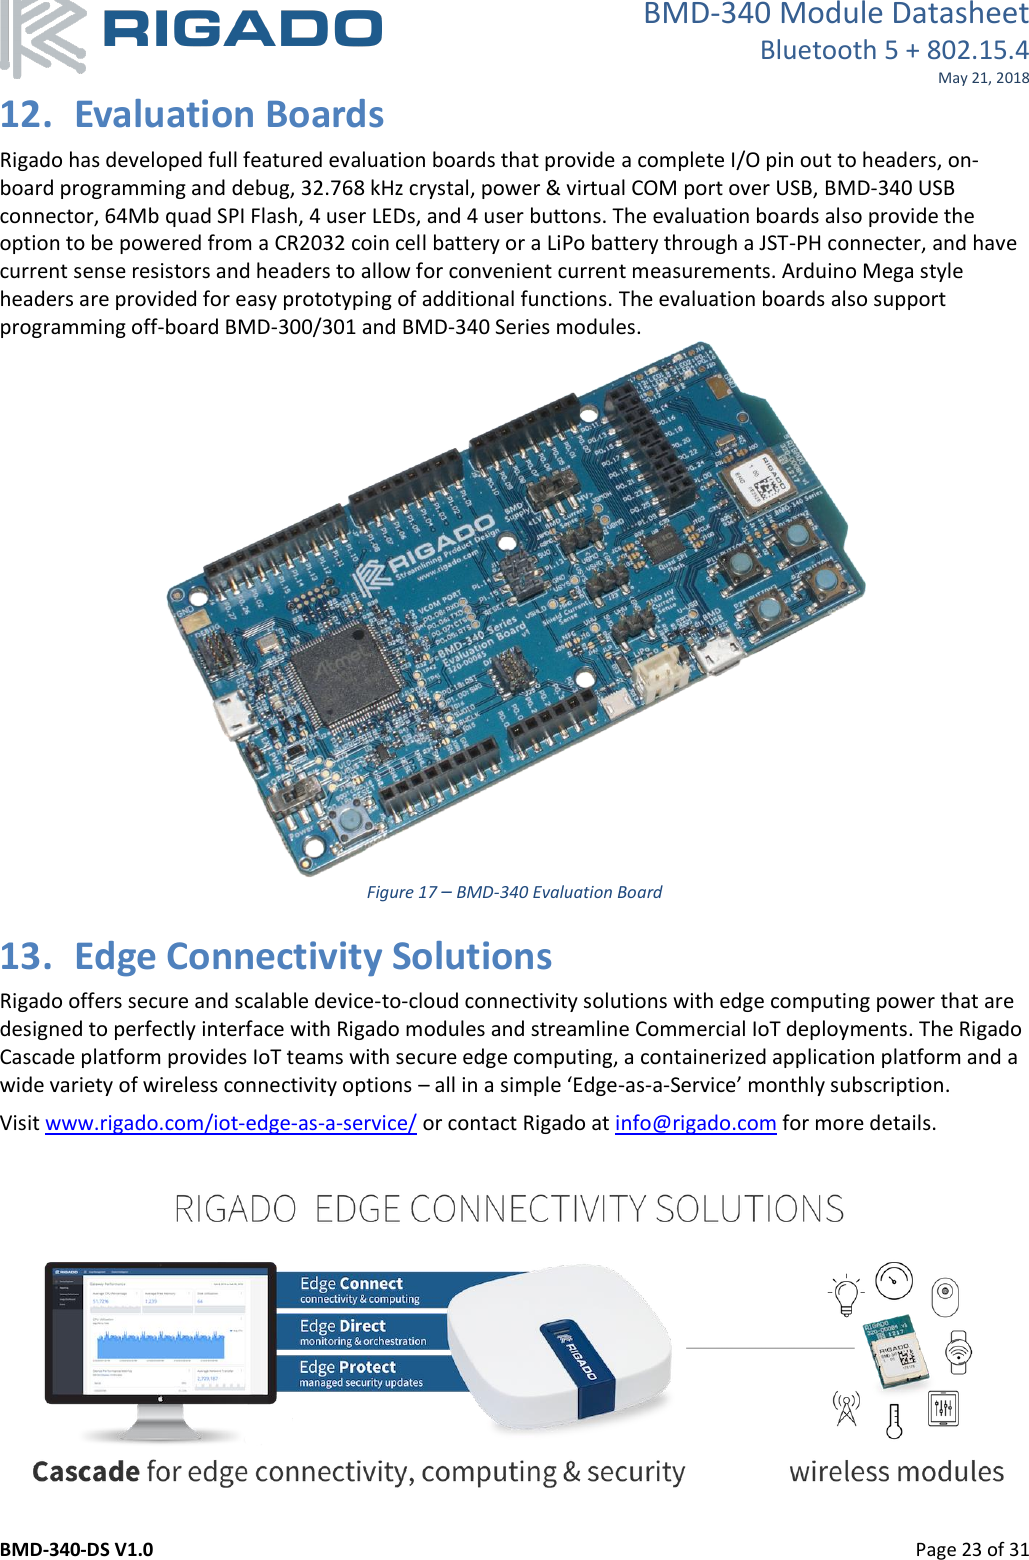 BMD-340 Module Datasheet Bluetooth 5 + 802.15.4 May 21, 2018 BMD-340-DS V1.0         Page 23 of 31 12. Evaluation Boards Rigado has developed full featured evaluation boards that provide a complete I/O pin out to headers, on-board programming and debug, 32.768 kHz crystal, power &amp; virtual COM port over USB, BMD-340 USB connector, 64Mb quad SPI Flash, 4 user LEDs, and 4 user buttons. The evaluation boards also provide the option to be powered from a CR2032 coin cell battery or a LiPo battery through a JST-PH connecter, and have current sense resistors and headers to allow for convenient current measurements. Arduino Mega style headers are provided for easy prototyping of additional functions. The evaluation boards also support programming off-board BMD-300/301 and BMD-340 Series modules.   Figure 17 – BMD-340 Evaluation Board 13. Edge Connectivity Solutions Rigado offers secure and scalable device-to-cloud connectivity solutions with edge computing power that are designed to perfectly interface with Rigado modules and streamline Commercial IoT deployments. The Rigado Cascade platform provides IoT teams with secure edge computing, a containerized application platform and a wide variety of wireless connectivity options – all in a simple ‘Edge-as-a-Service’ monthly subscription.   Visit www.rigado.com/iot-edge-as-a-service/ or contact Rigado at info@rigado.com for more details.       